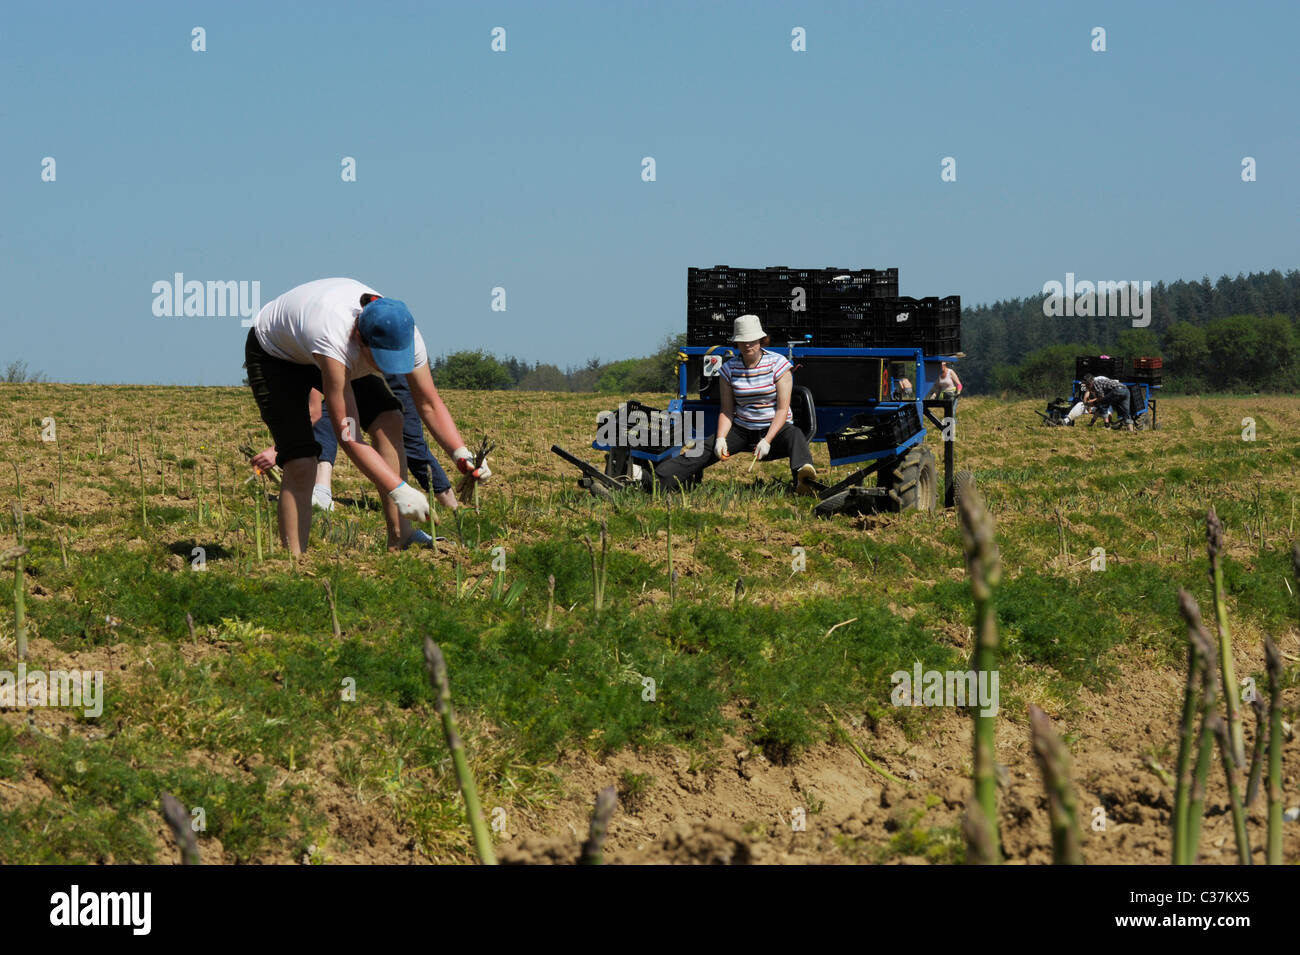 English asparagus being picked by migrant workers in West Sussex, England Stock Photo